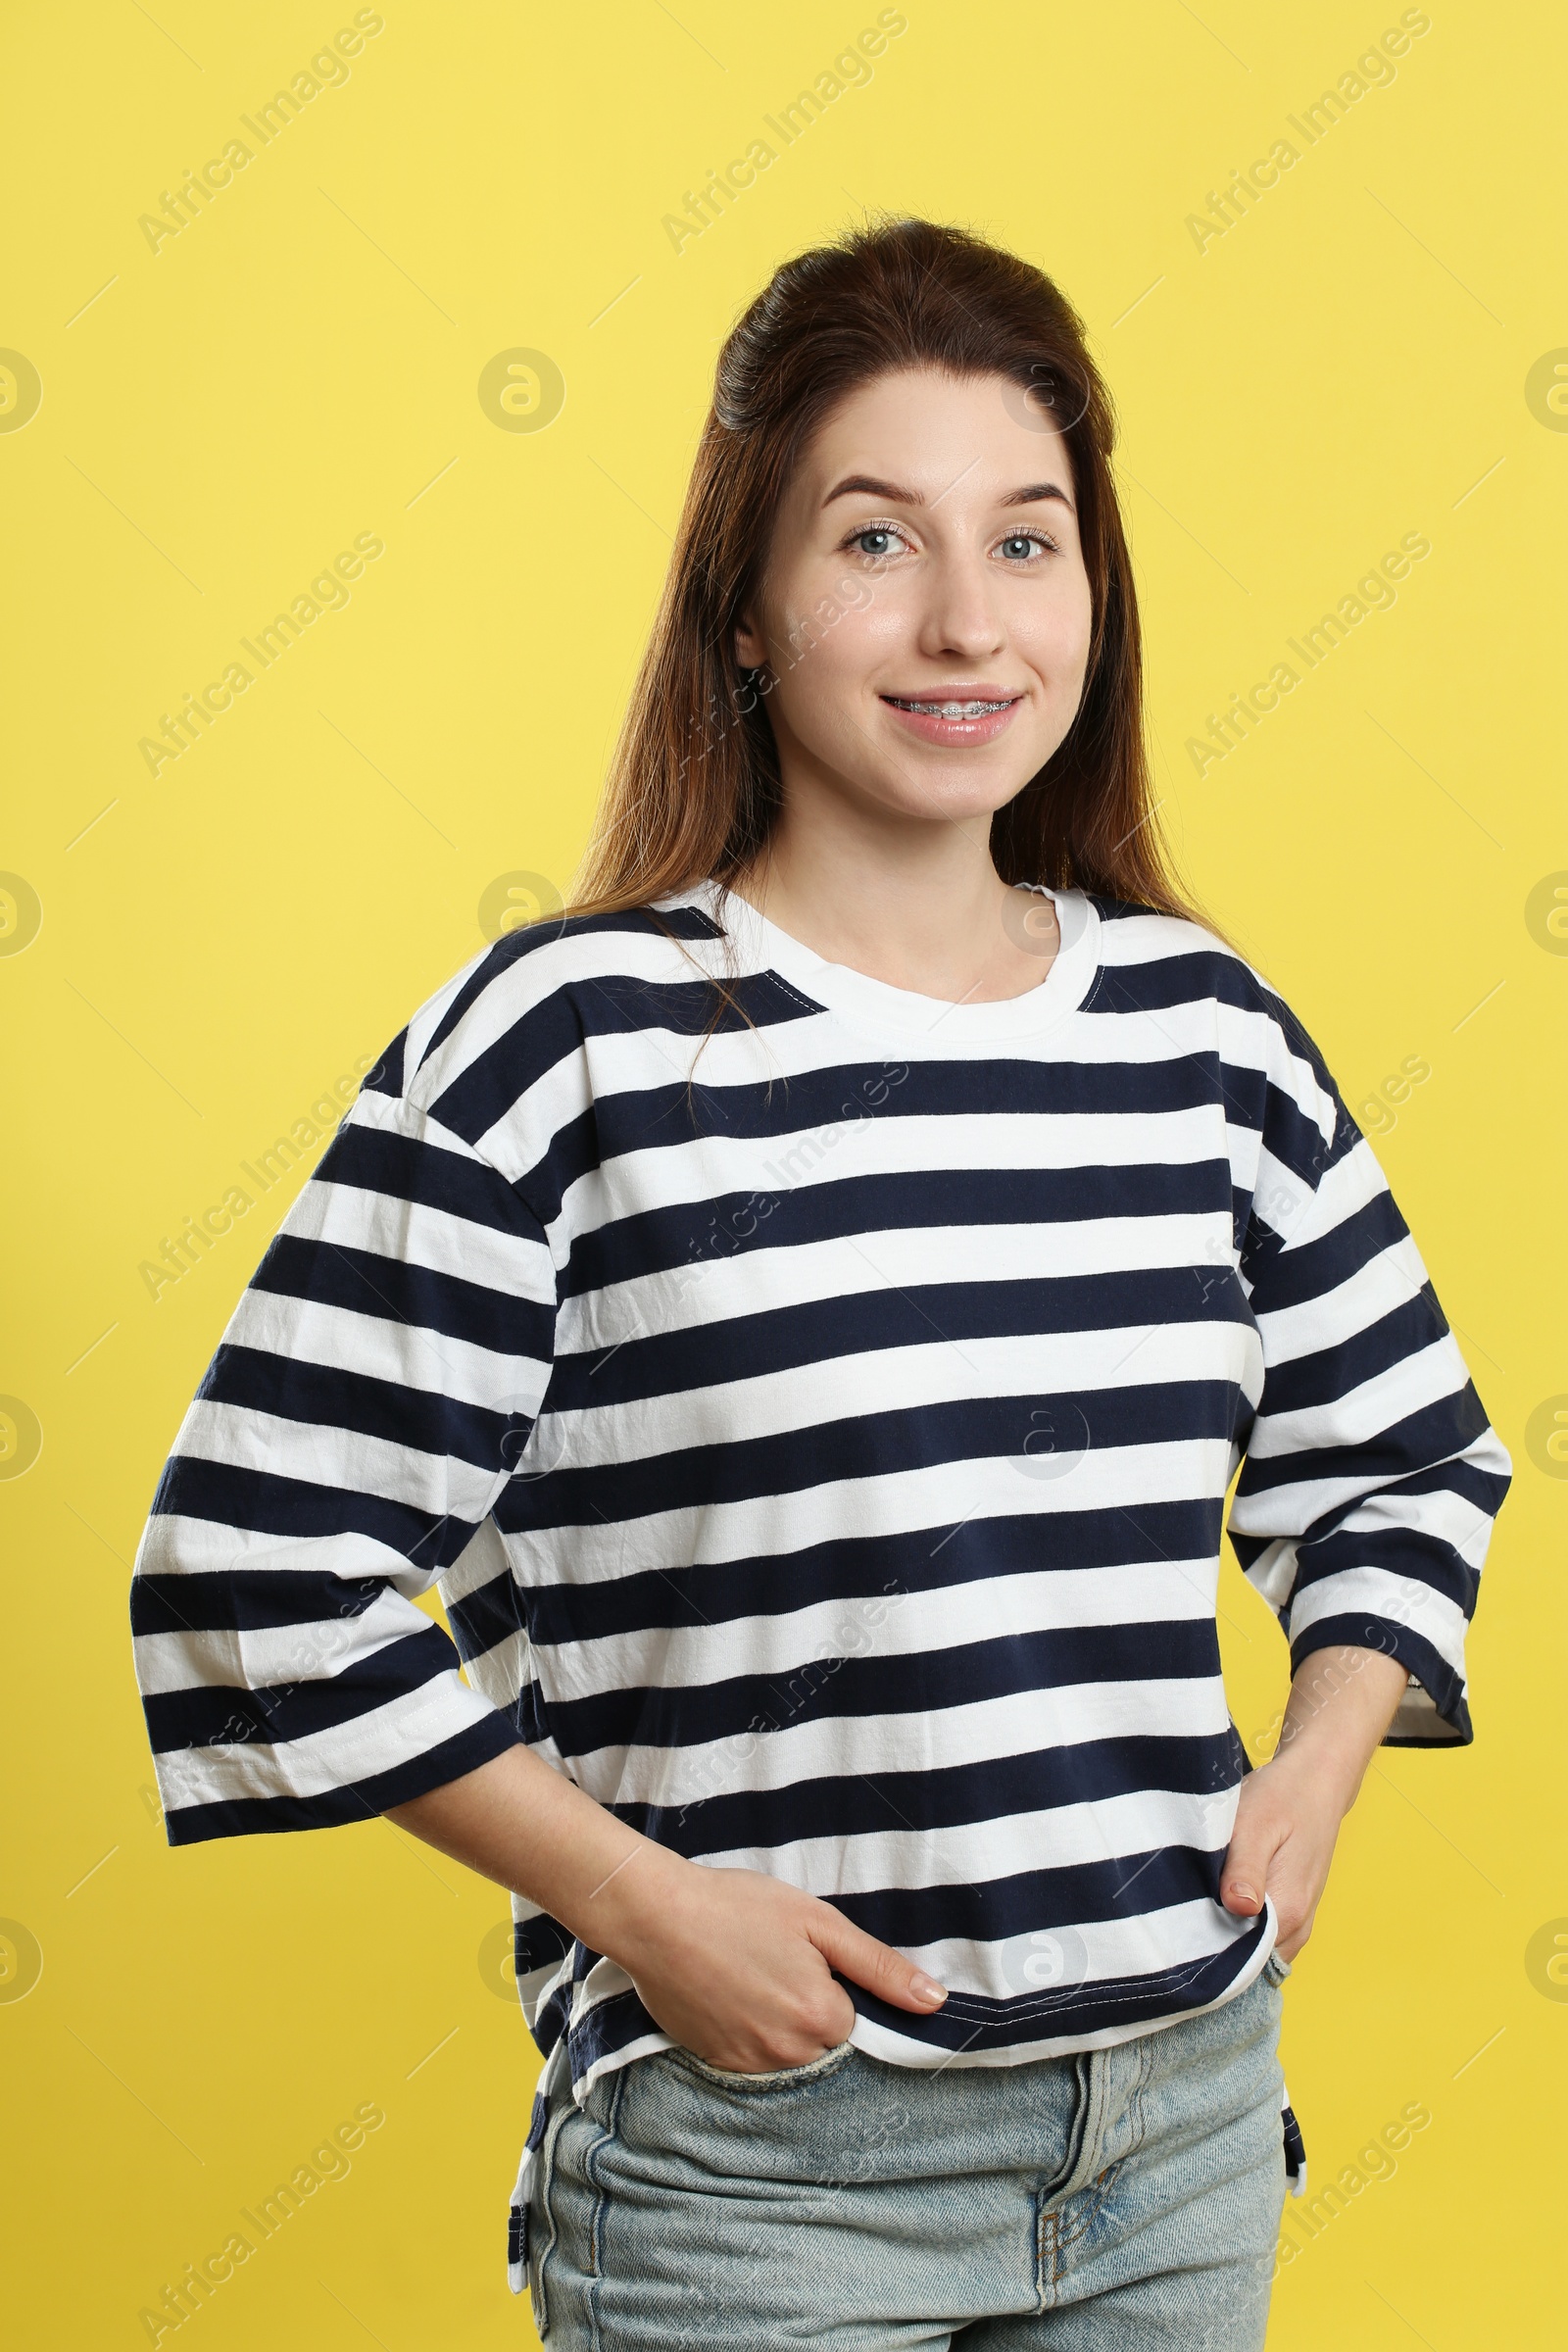 Photo of Portrait of smiling woman with dental braces on yellow background